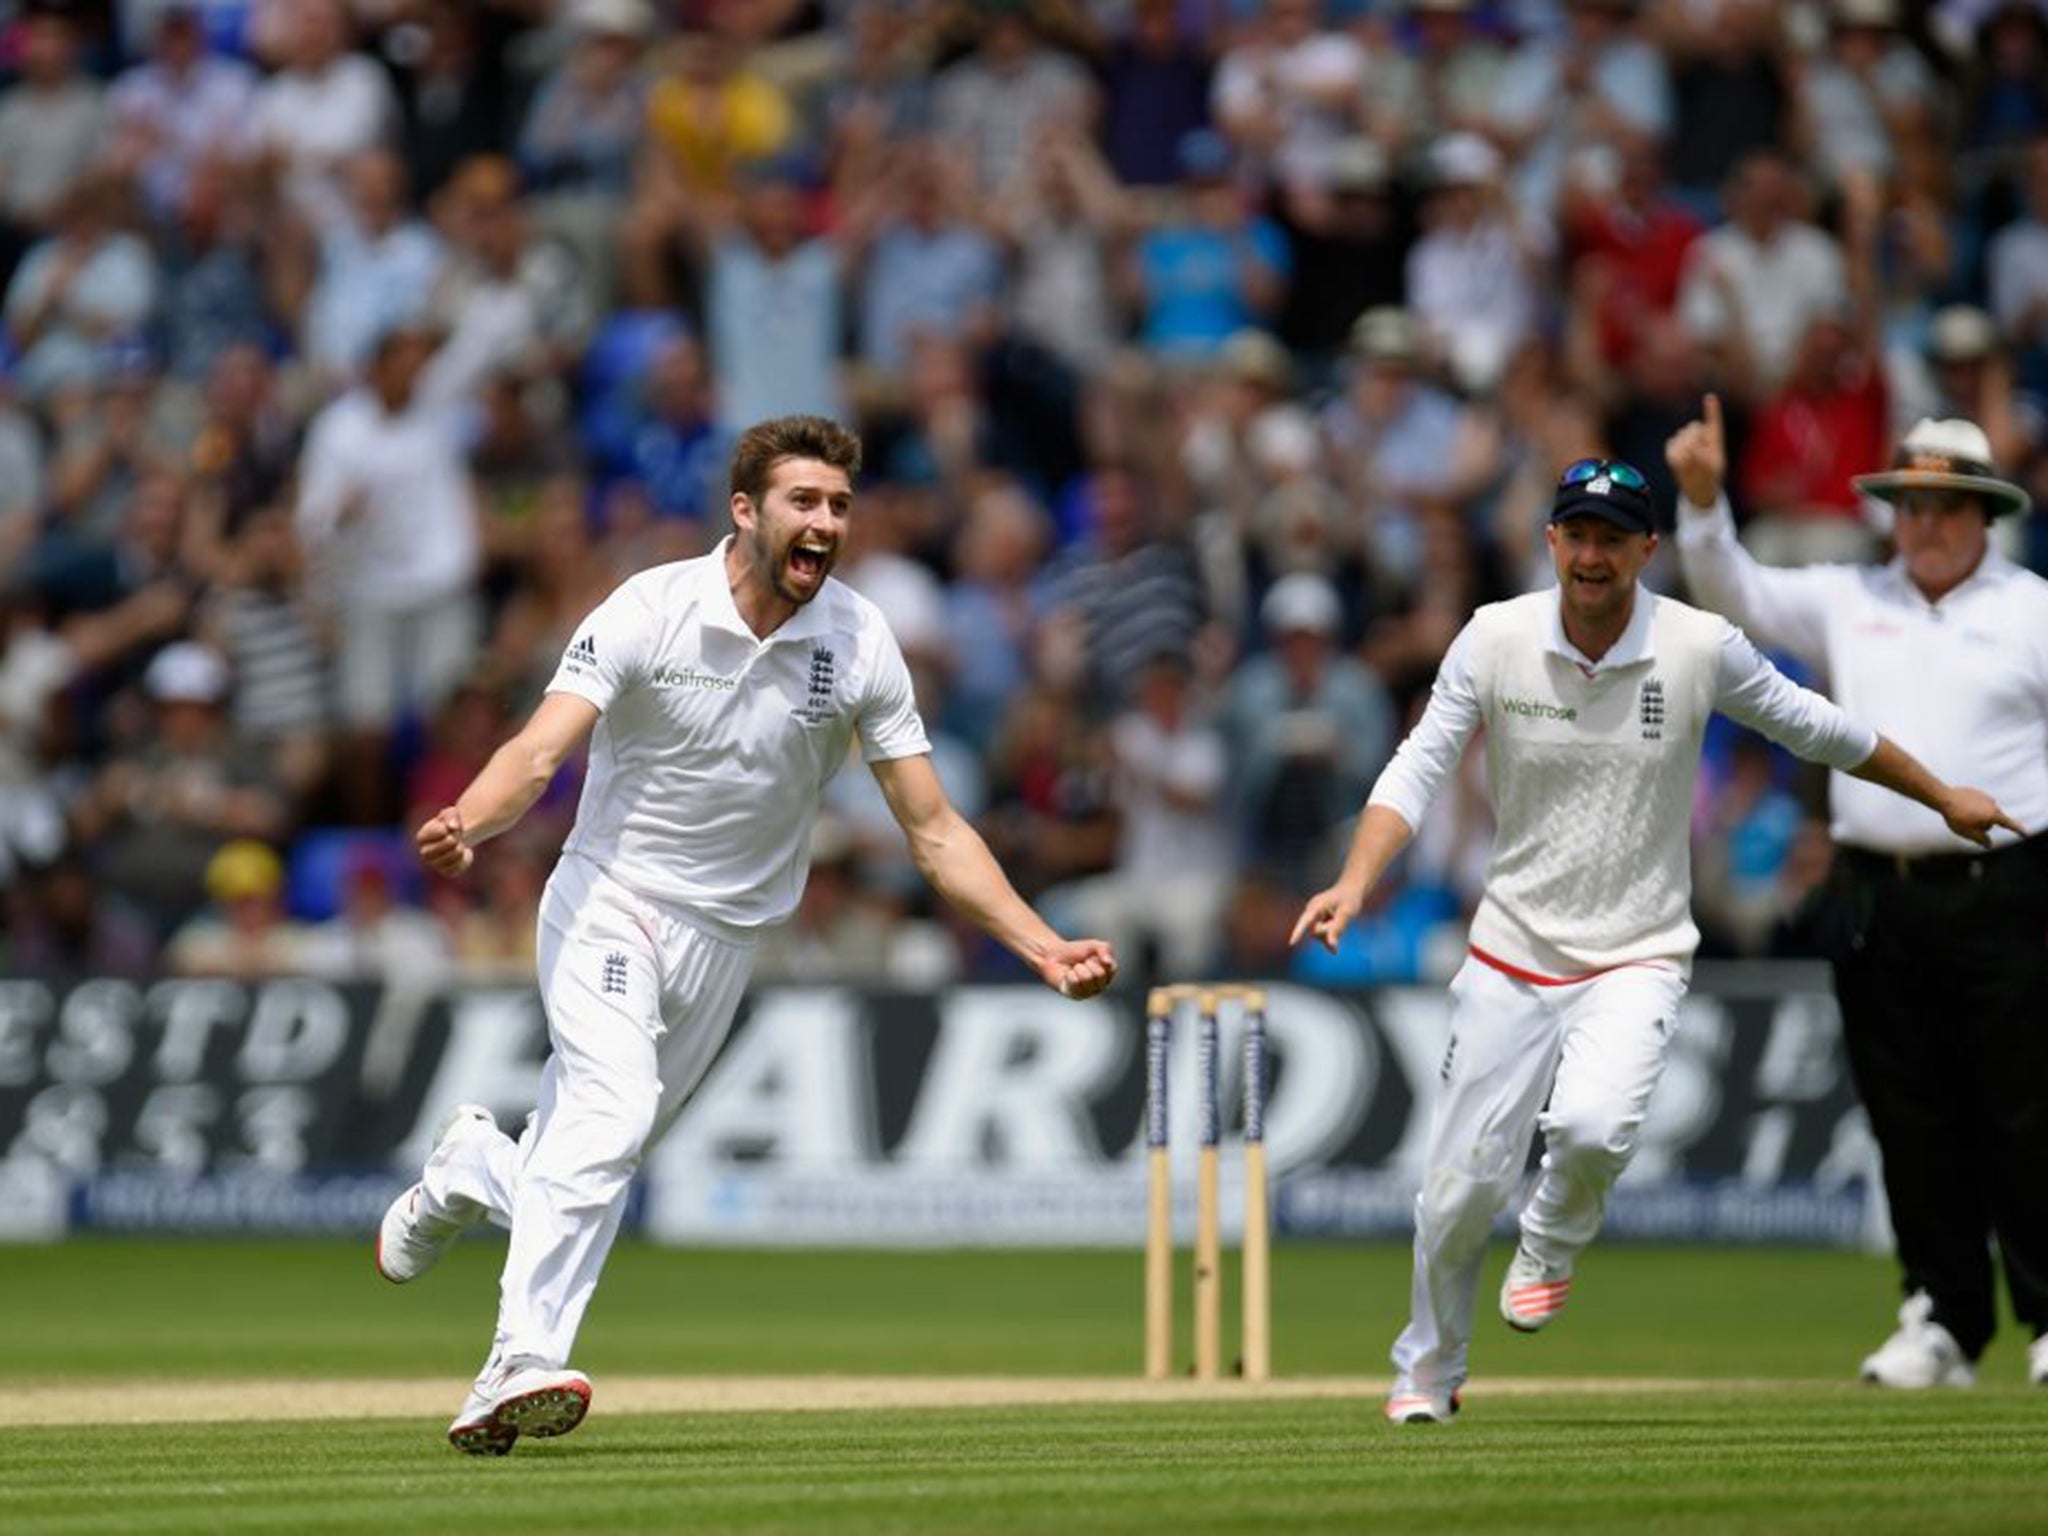 Wood celebrates taking the wicket of Adam Voges in the First Test in Cardiff